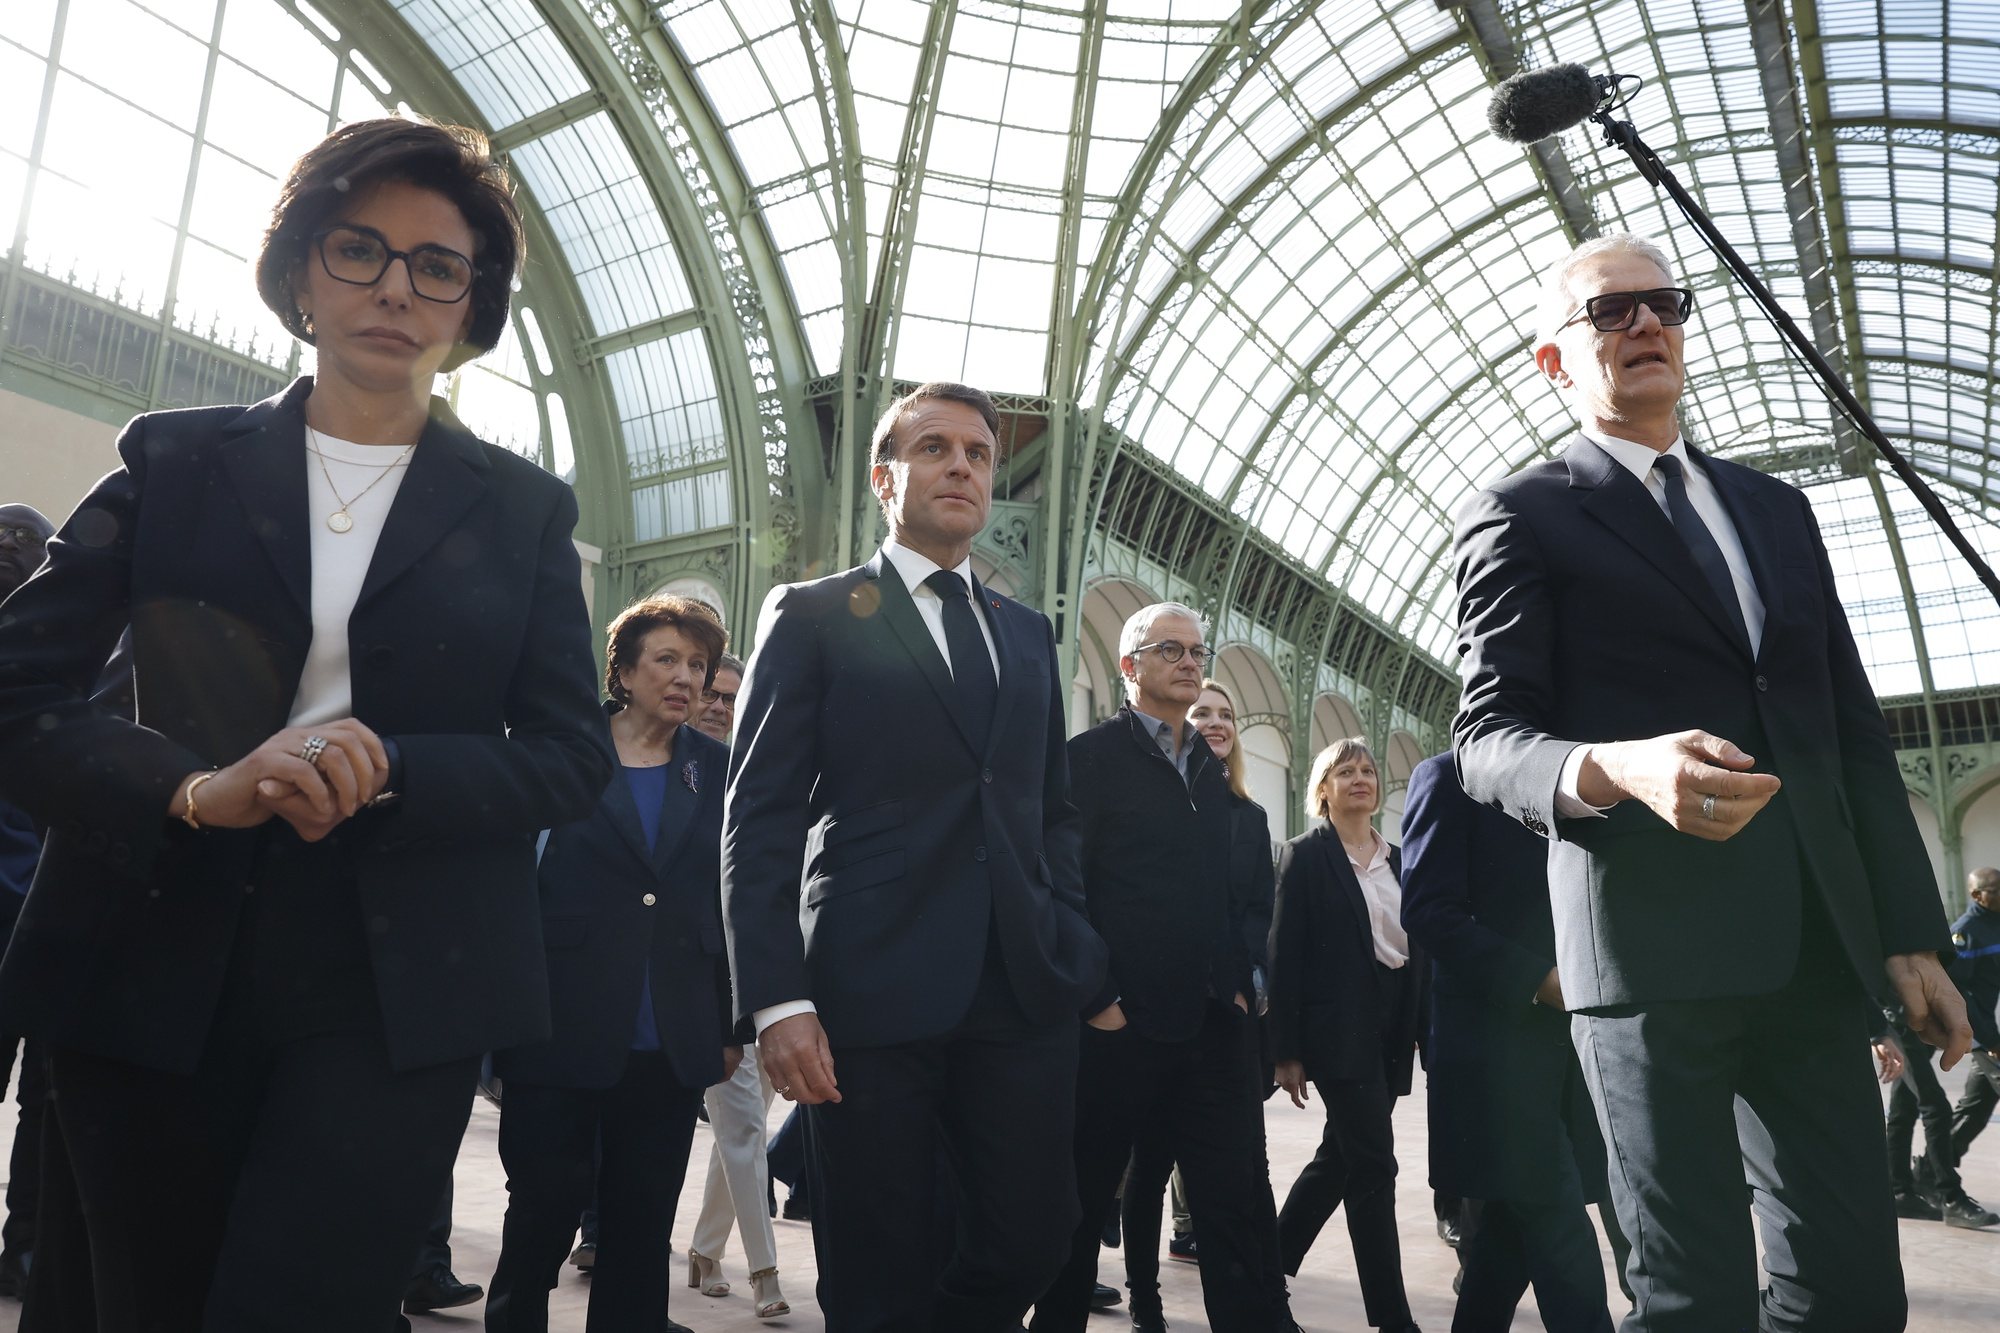 epa11279435 French President Emmanuel Macron (C) walks next to President of the Grand Palais Didier Fusillier (R) and  Minister of Culture of France Rachida Dati (L) during his visit at the Grand Palais 100 days ahead of the Paris 2024 Olympic Games in Paris, France, 15 April 2024. The 2024 Summer Olympics are held in Paris from 26 July to 11 August 2024, and the Grand Palais will host Fencing and Taekwondo.  EPA/YOAN VALAT / POOL